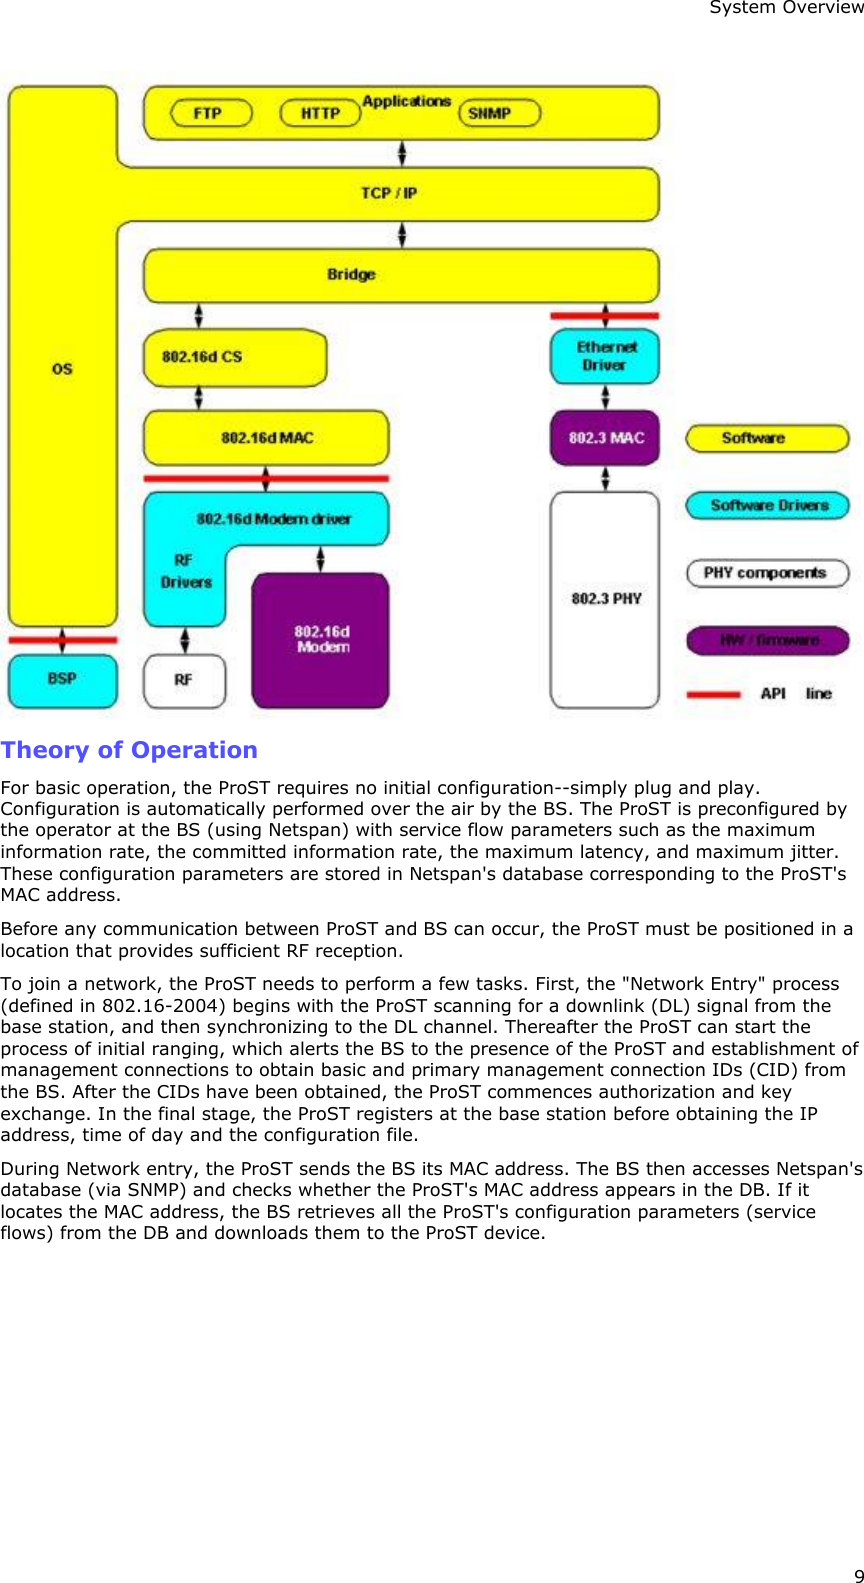 System Overview 9  Theory of Operation For basic operation, the ProST requires no initial configuration--simply plug and play. Configuration is automatically performed over the air by the BS. The ProST is preconfigured by the operator at the BS (using Netspan) with service flow parameters such as the maximum information rate, the committed information rate, the maximum latency, and maximum jitter. These configuration parameters are stored in Netspan&apos;s database corresponding to the ProST&apos;s MAC address. Before any communication between ProST and BS can occur, the ProST must be positioned in a location that provides sufficient RF reception.  To join a network, the ProST needs to perform a few tasks. First, the &quot;Network Entry&quot; process (defined in 802.16-2004) begins with the ProST scanning for a downlink (DL) signal from the base station, and then synchronizing to the DL channel. Thereafter the ProST can start the process of initial ranging, which alerts the BS to the presence of the ProST and establishment of management connections to obtain basic and primary management connection IDs (CID) from the BS. After the CIDs have been obtained, the ProST commences authorization and key exchange. In the final stage, the ProST registers at the base station before obtaining the IP address, time of day and the configuration file.  During Network entry, the ProST sends the BS its MAC address. The BS then accesses Netspan&apos;s database (via SNMP) and checks whether the ProST&apos;s MAC address appears in the DB. If it locates the MAC address, the BS retrieves all the ProST&apos;s configuration parameters (service flows) from the DB and downloads them to the ProST device.   